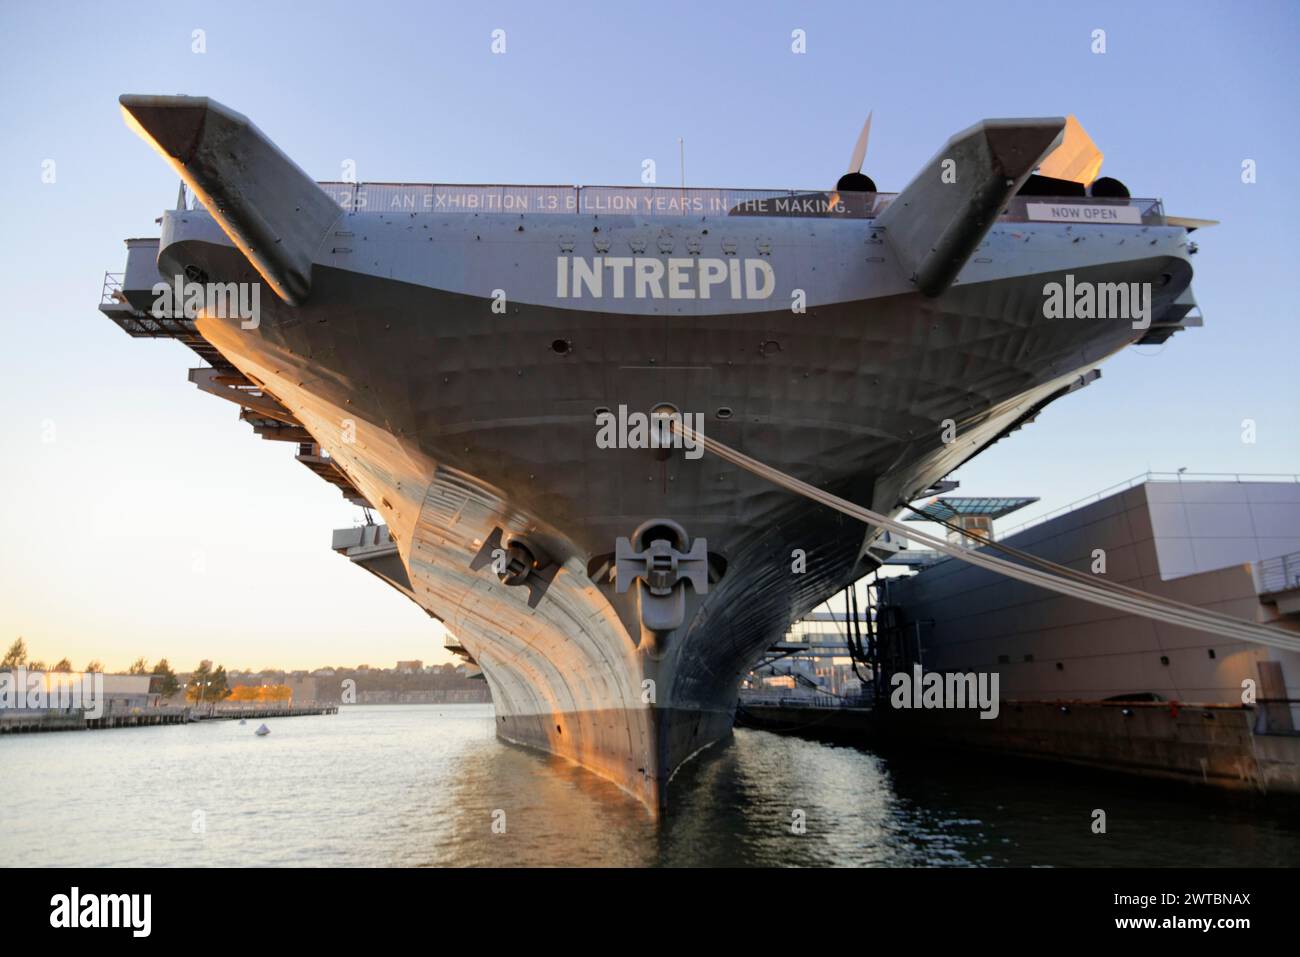 The front view of the museum ship Intrepid, a decommissioned aircraft carrier, in the water, on the East River, Manhattan, Brooklyn, New York City Stock Photo